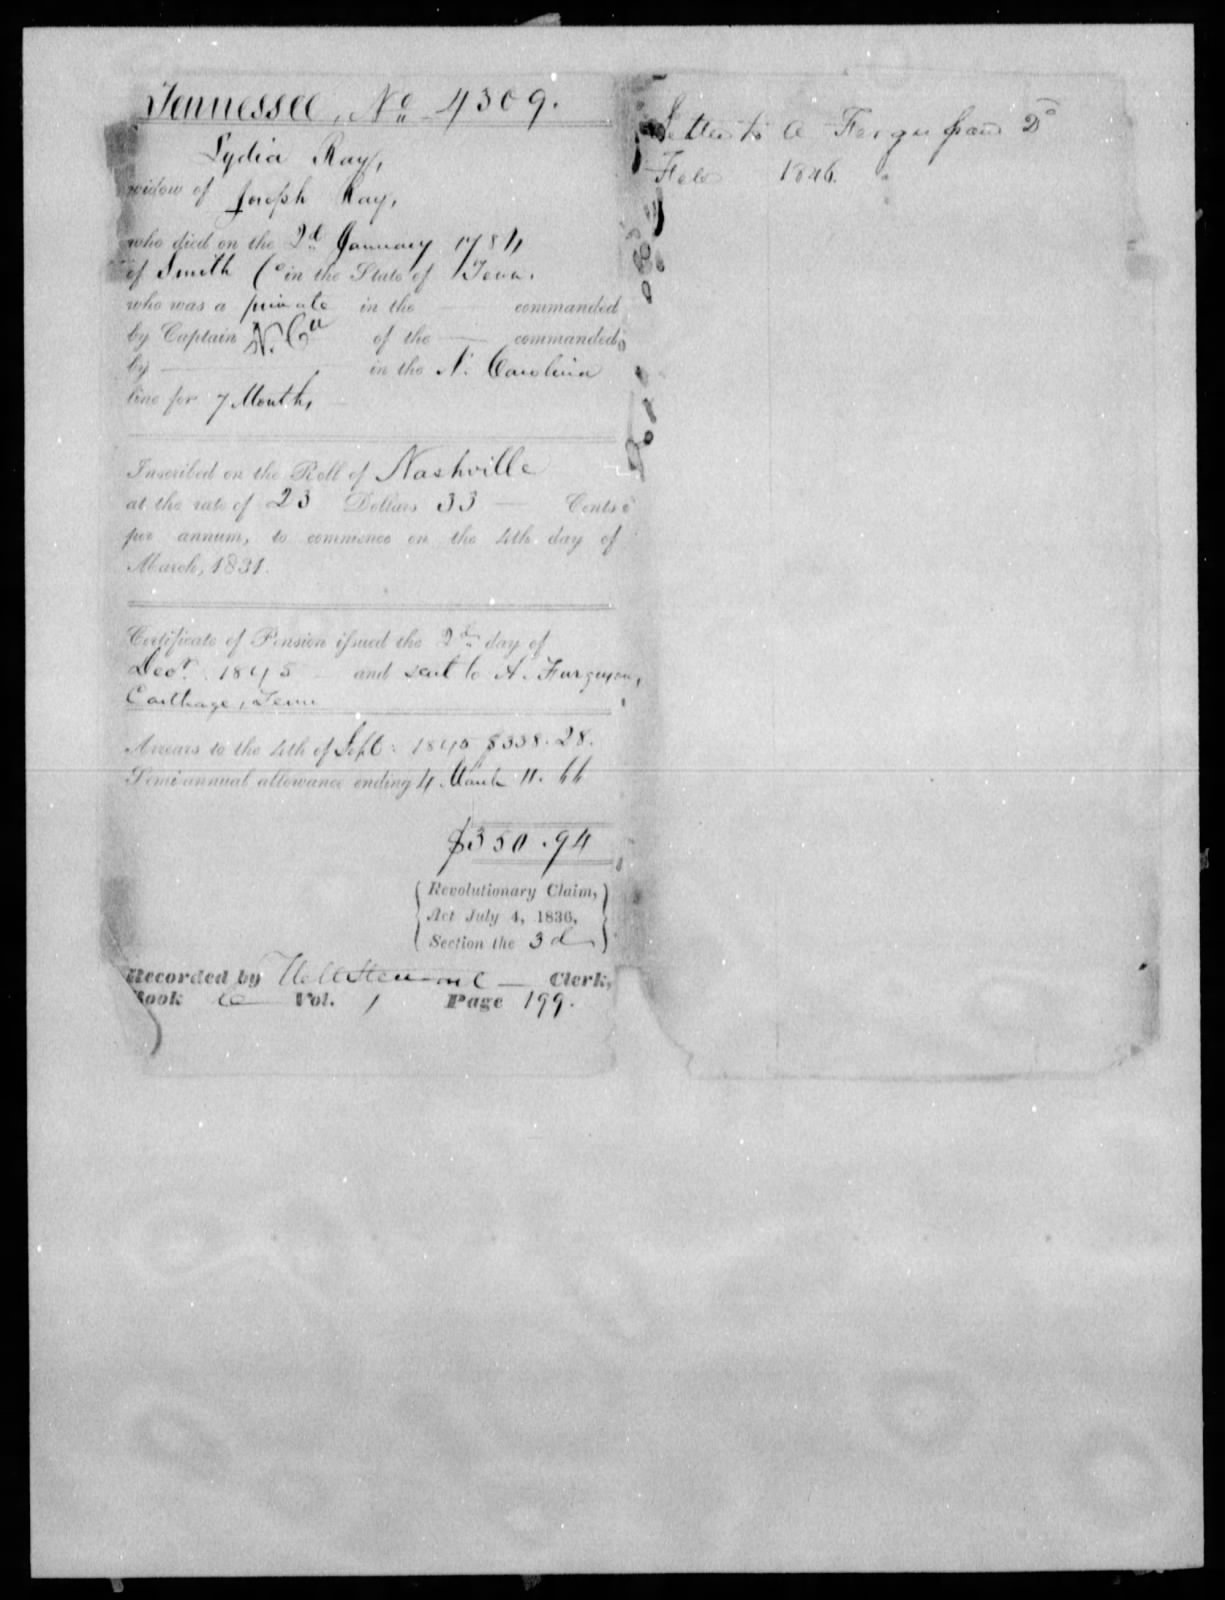 Docket for Pension from the U.S. Pension Office for Lydia Ray, 2 December 1845